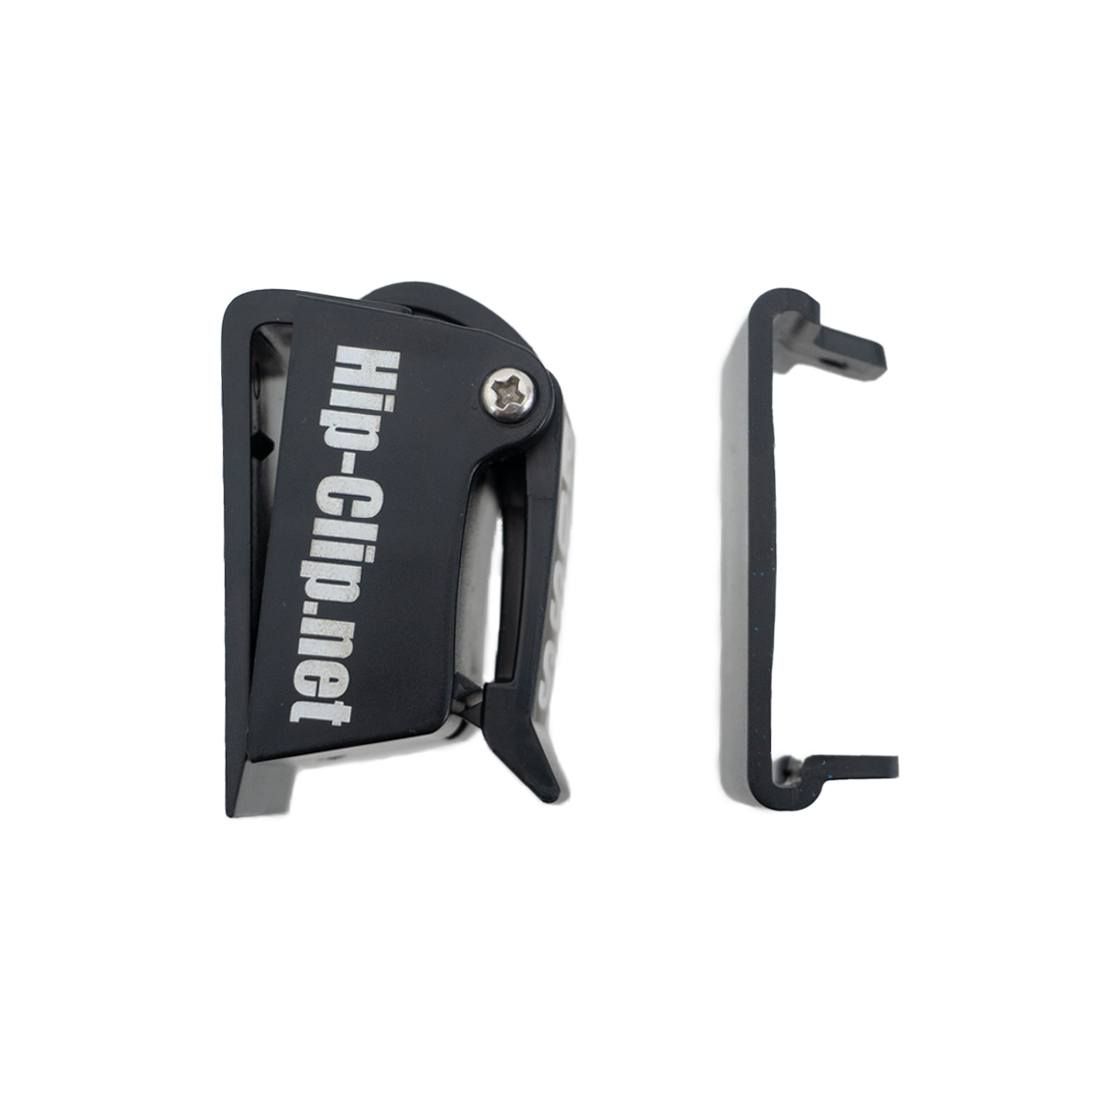 CCWC Hip Clip BOSS With Tool Belt Attachment - Separated View